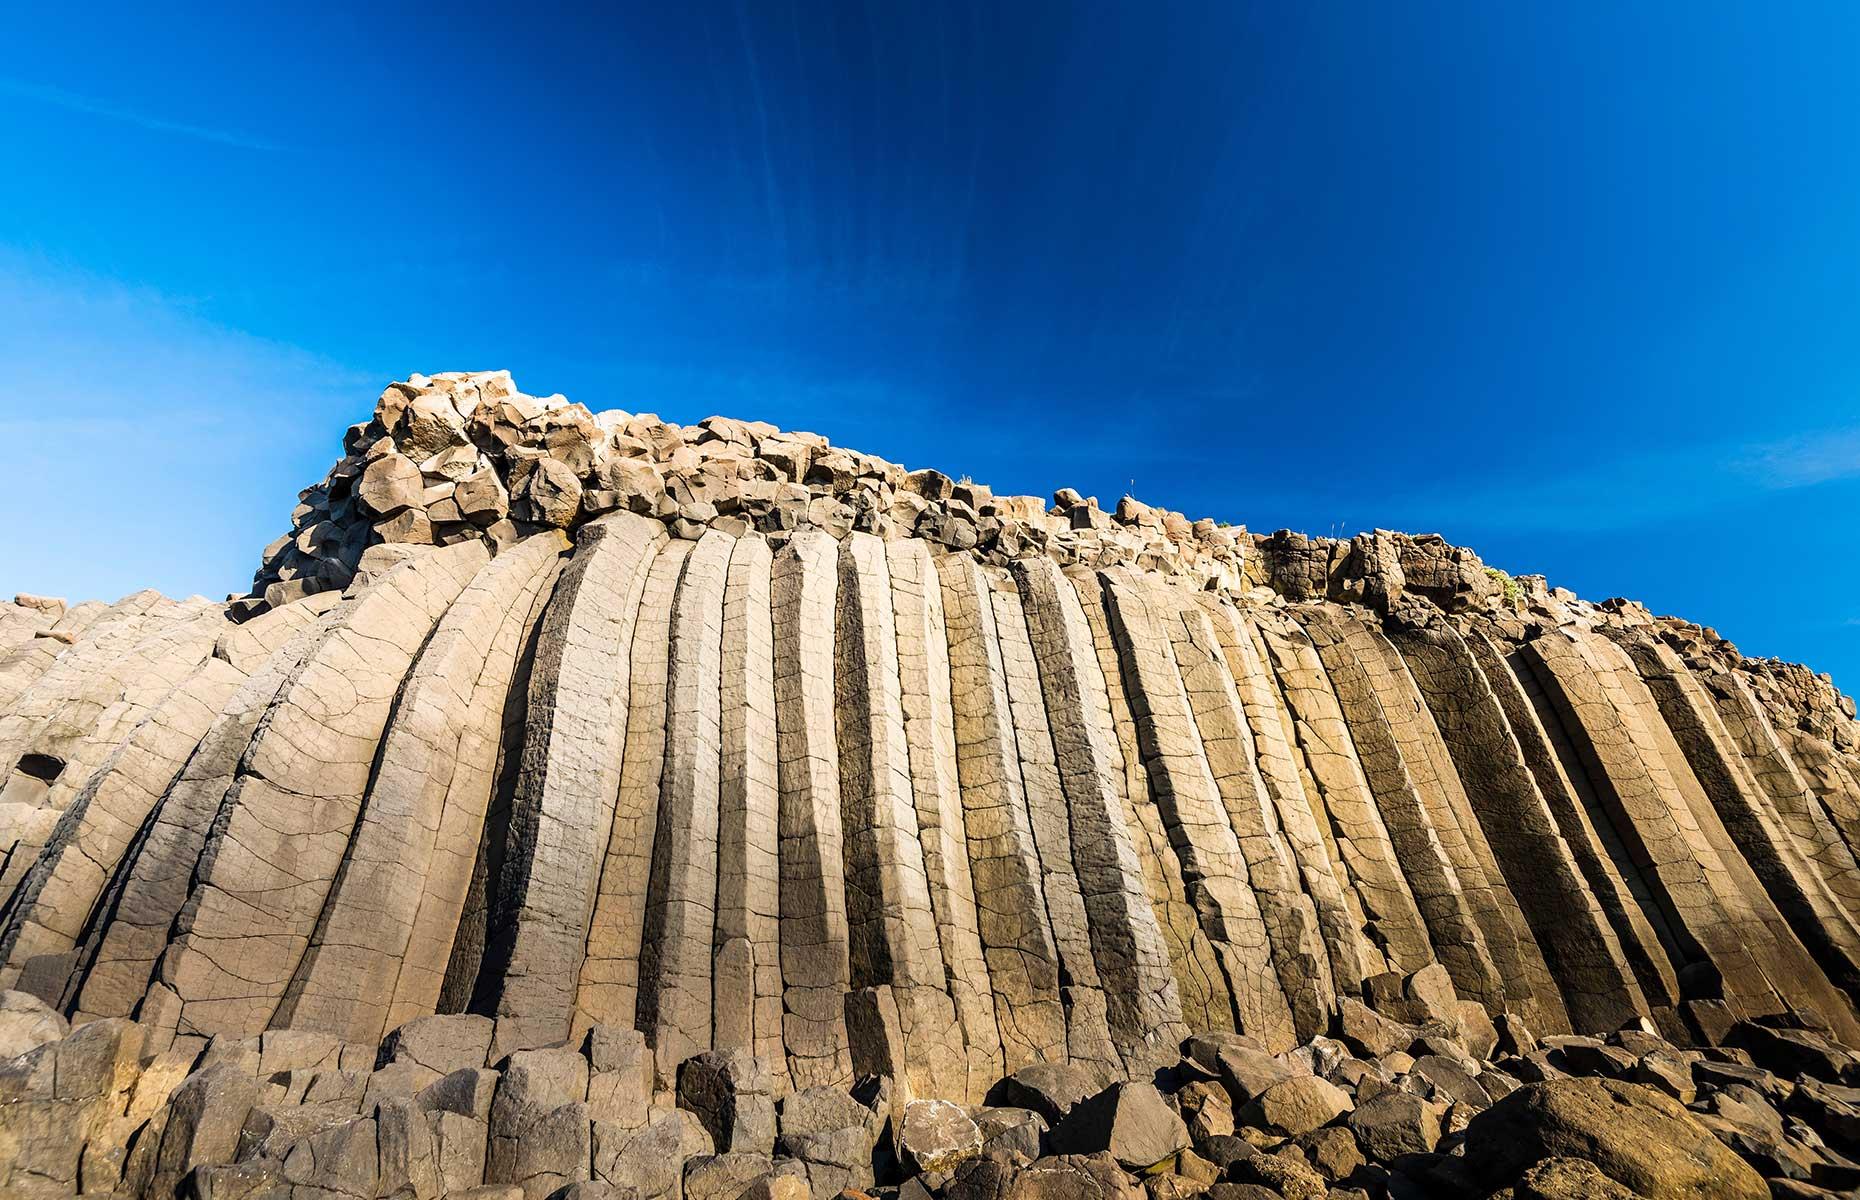 <p>It might not sound particularly thrilling, but Penghu’s basalt columns are one of the most striking natural sights in Taiwan. The Penghu archipelago is made up of 90 islands which mostly consist of basalt (or lava rock), so it’s no wonder Penghu is otherwise known as the Home of Basalt. The best one to see is the Daguoye column in Xiyu Township, where centuries of seawater and sea breezes have eroded the site into the unique structure that stands today. It looks even more impressive after a spout of heavy rainfall. </p>